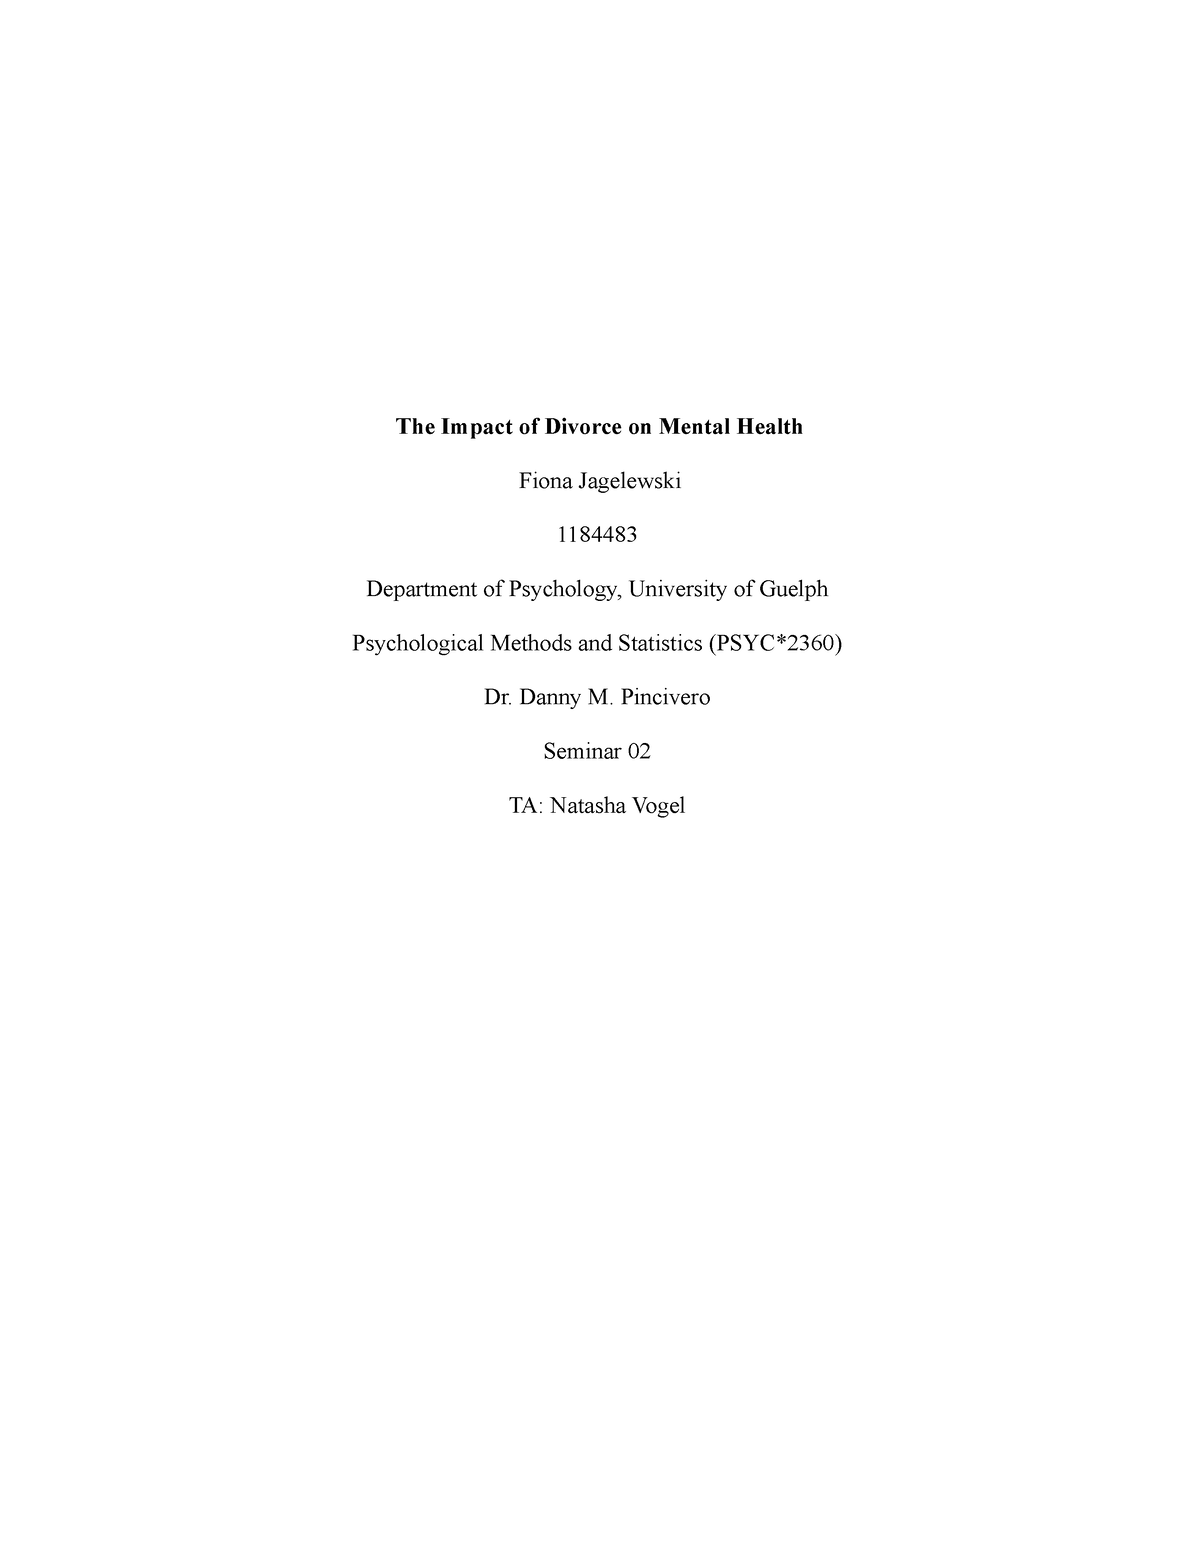 thesis proposal on divorce